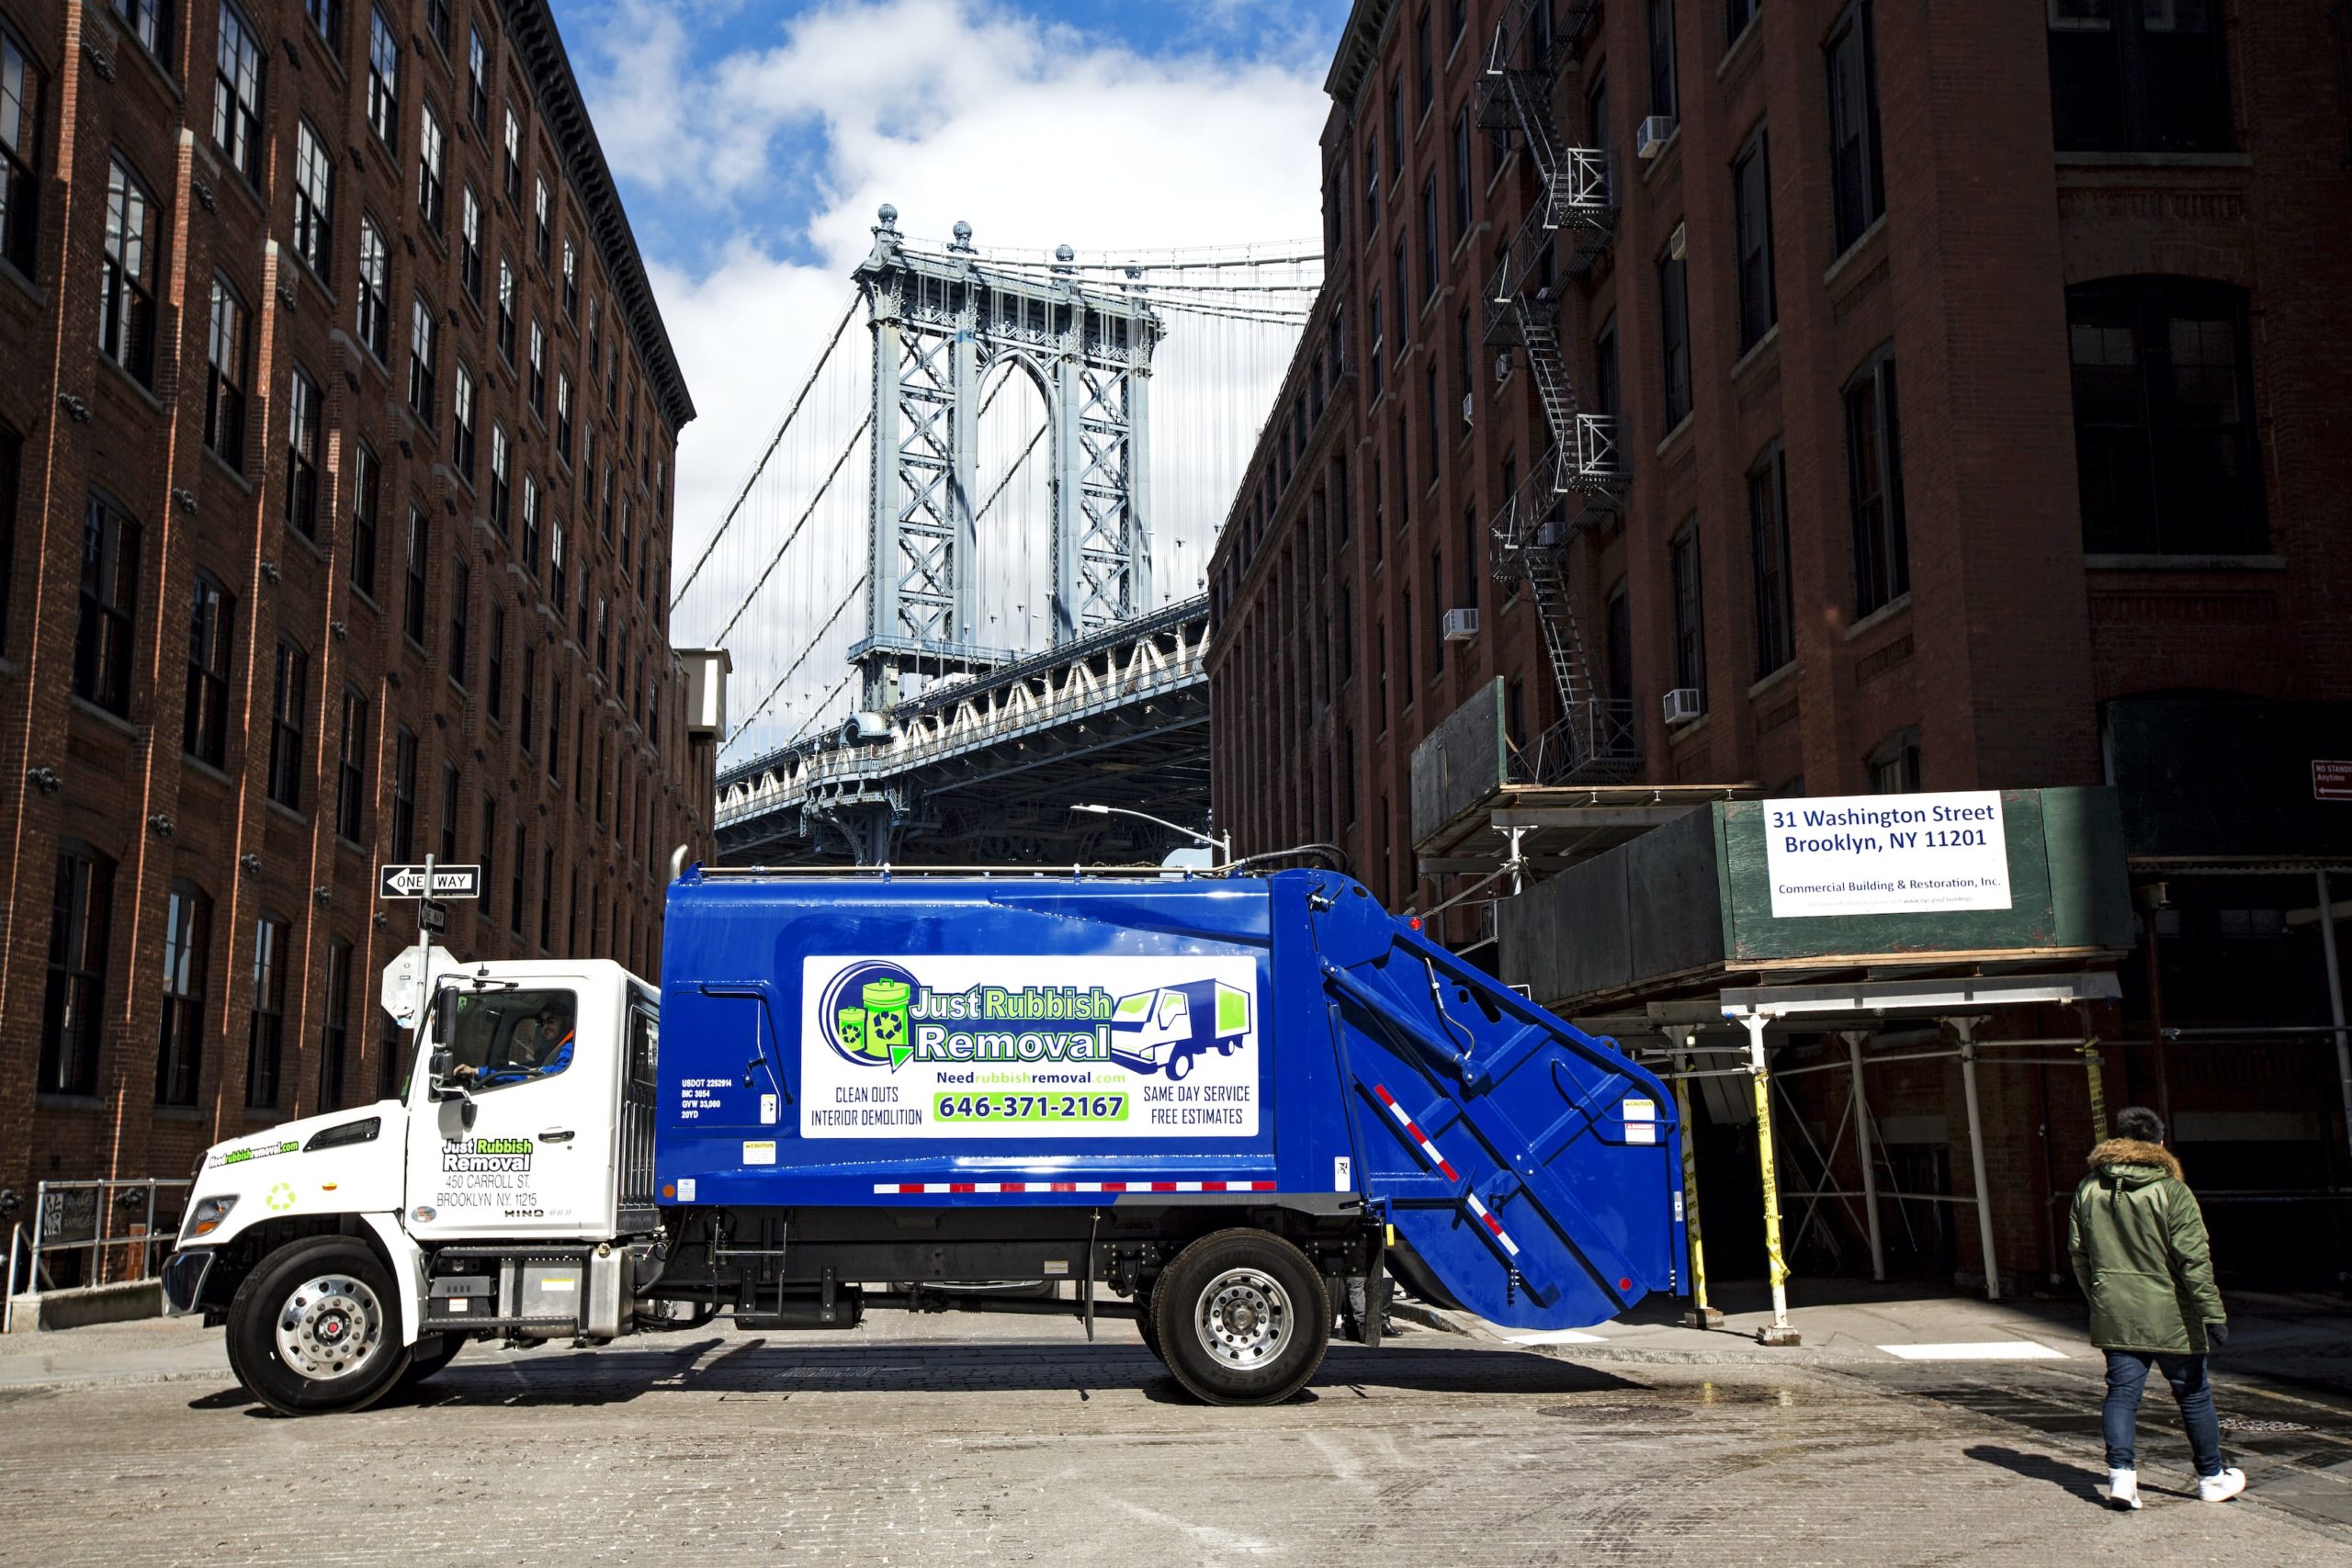 Appliance Cleaning Services NYC  Appliances Cleaned New York